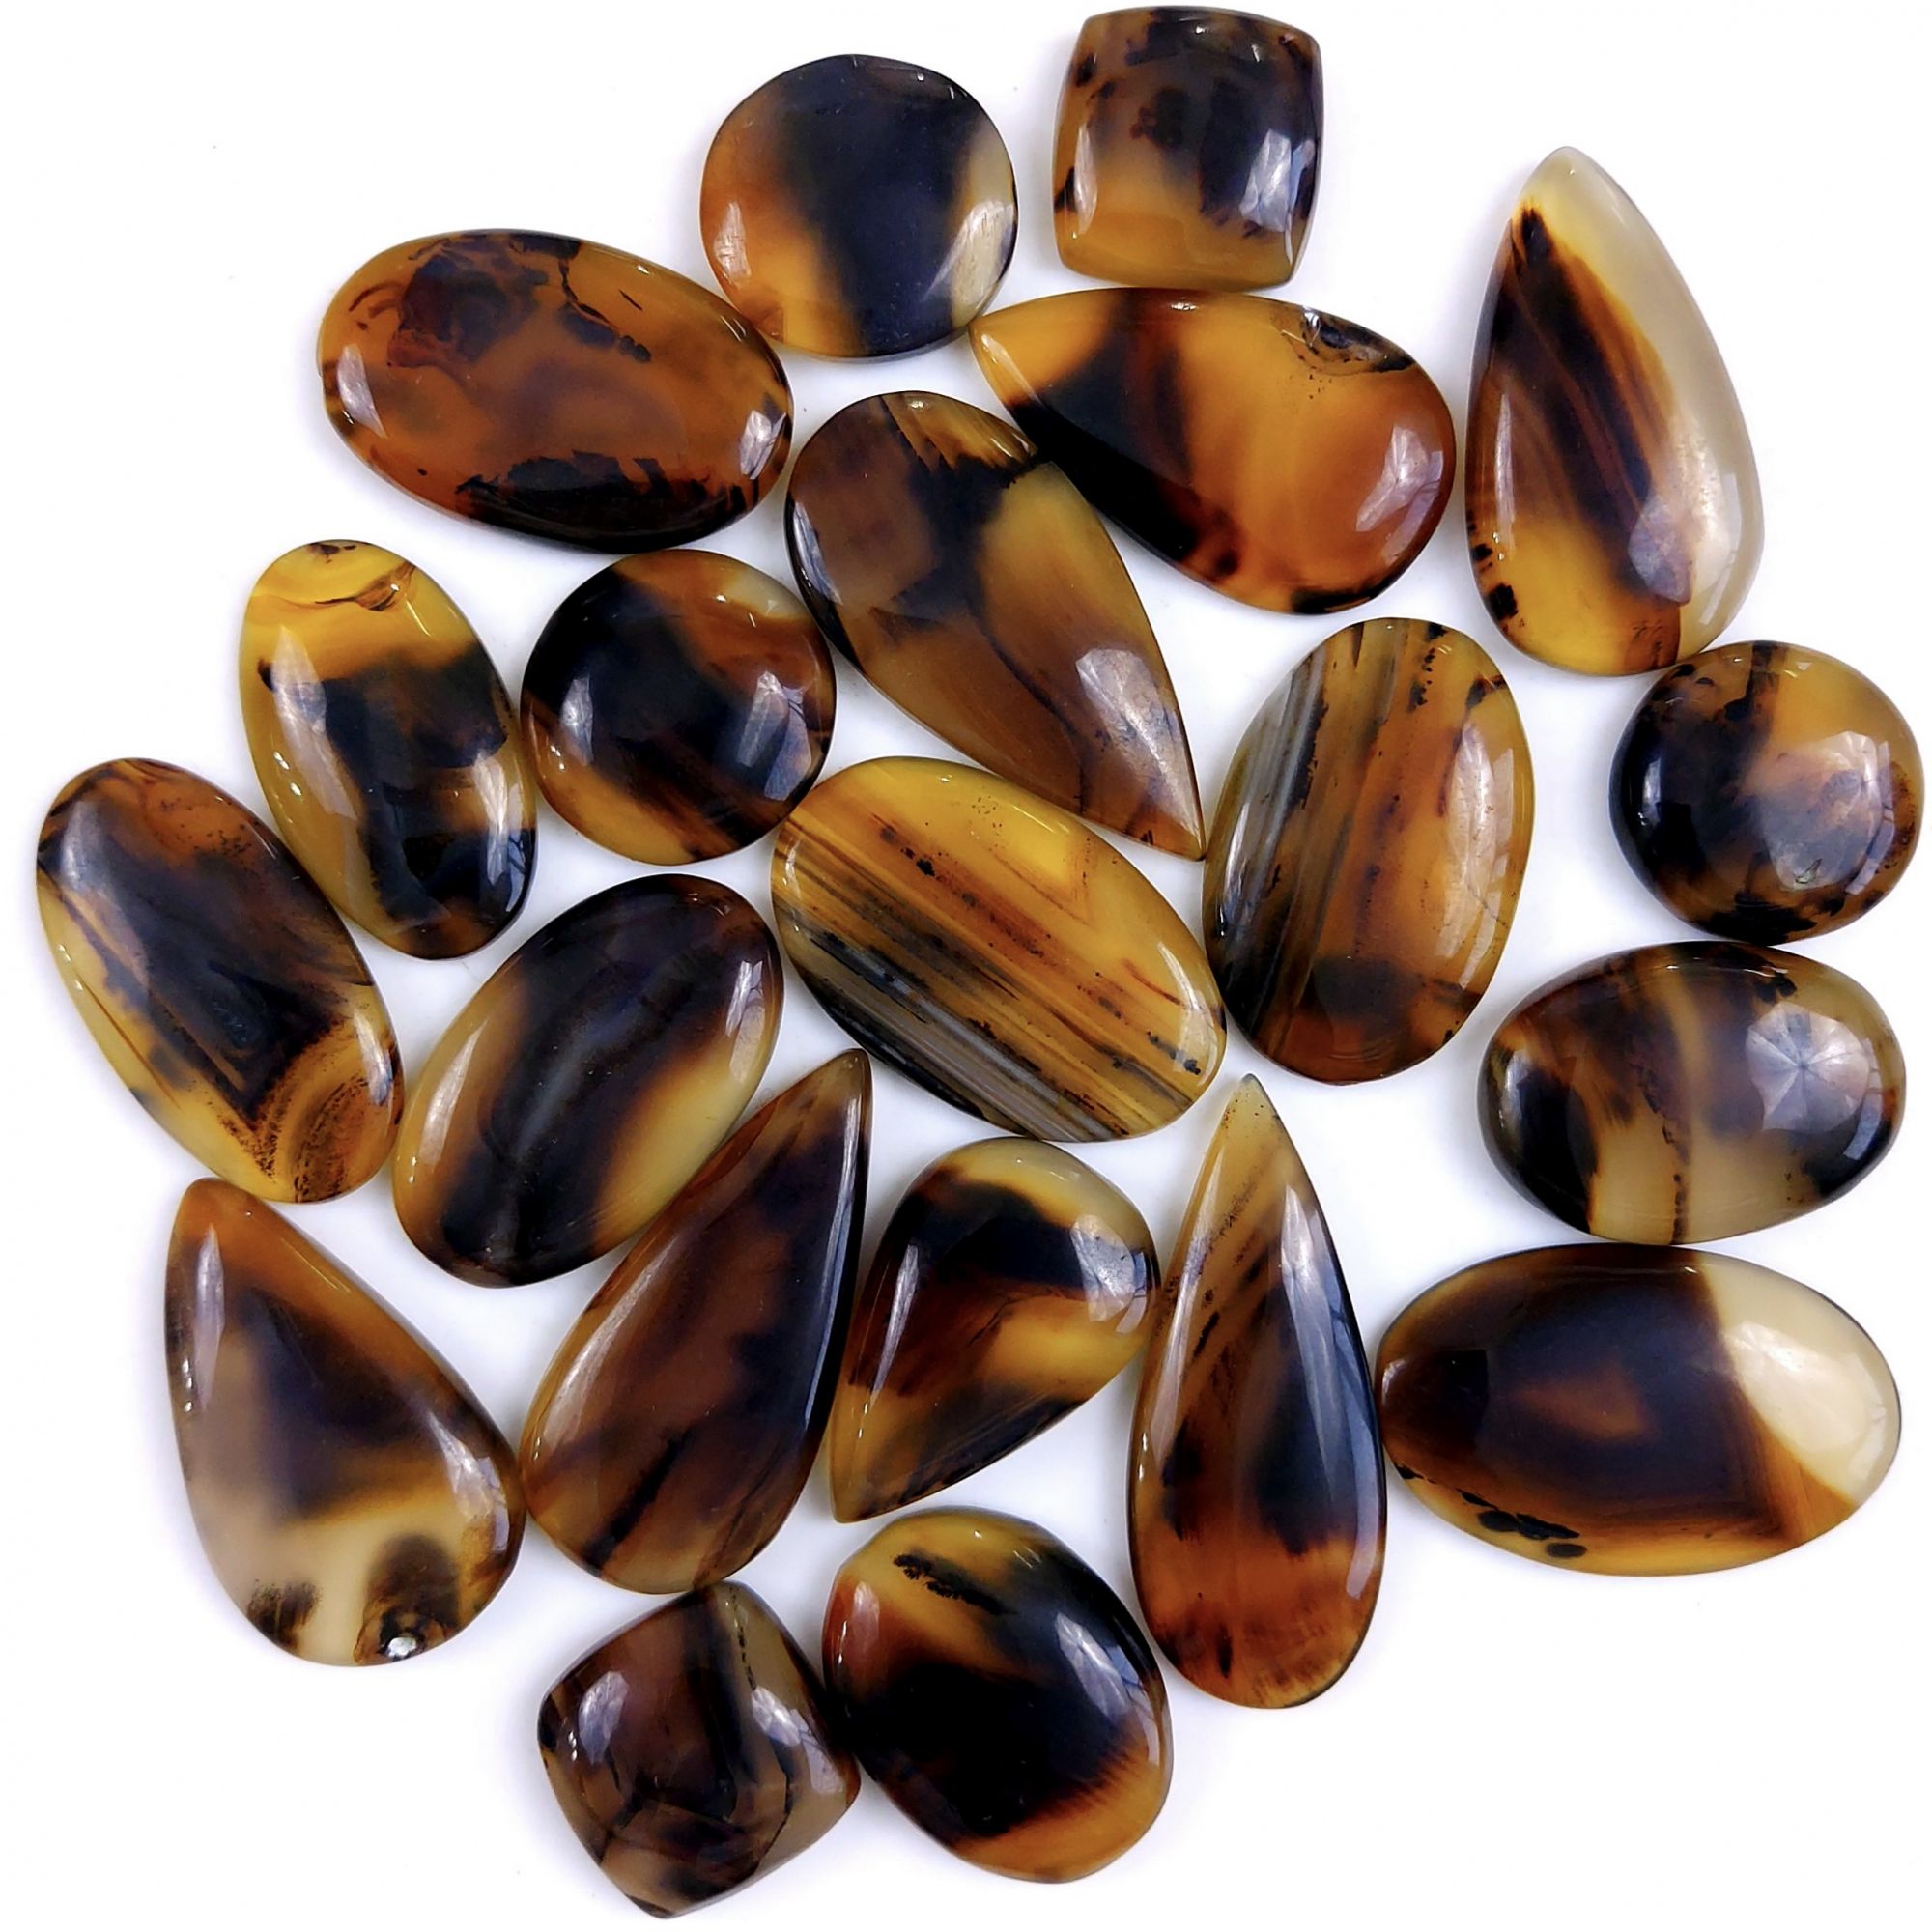 26Pcs 558Cts Natural Montana Agate Cabochon Lot Brown Flat Back Gemstone Crystal Wholesale Loose gemstone For Jewelry Making 35x25 22x14mm